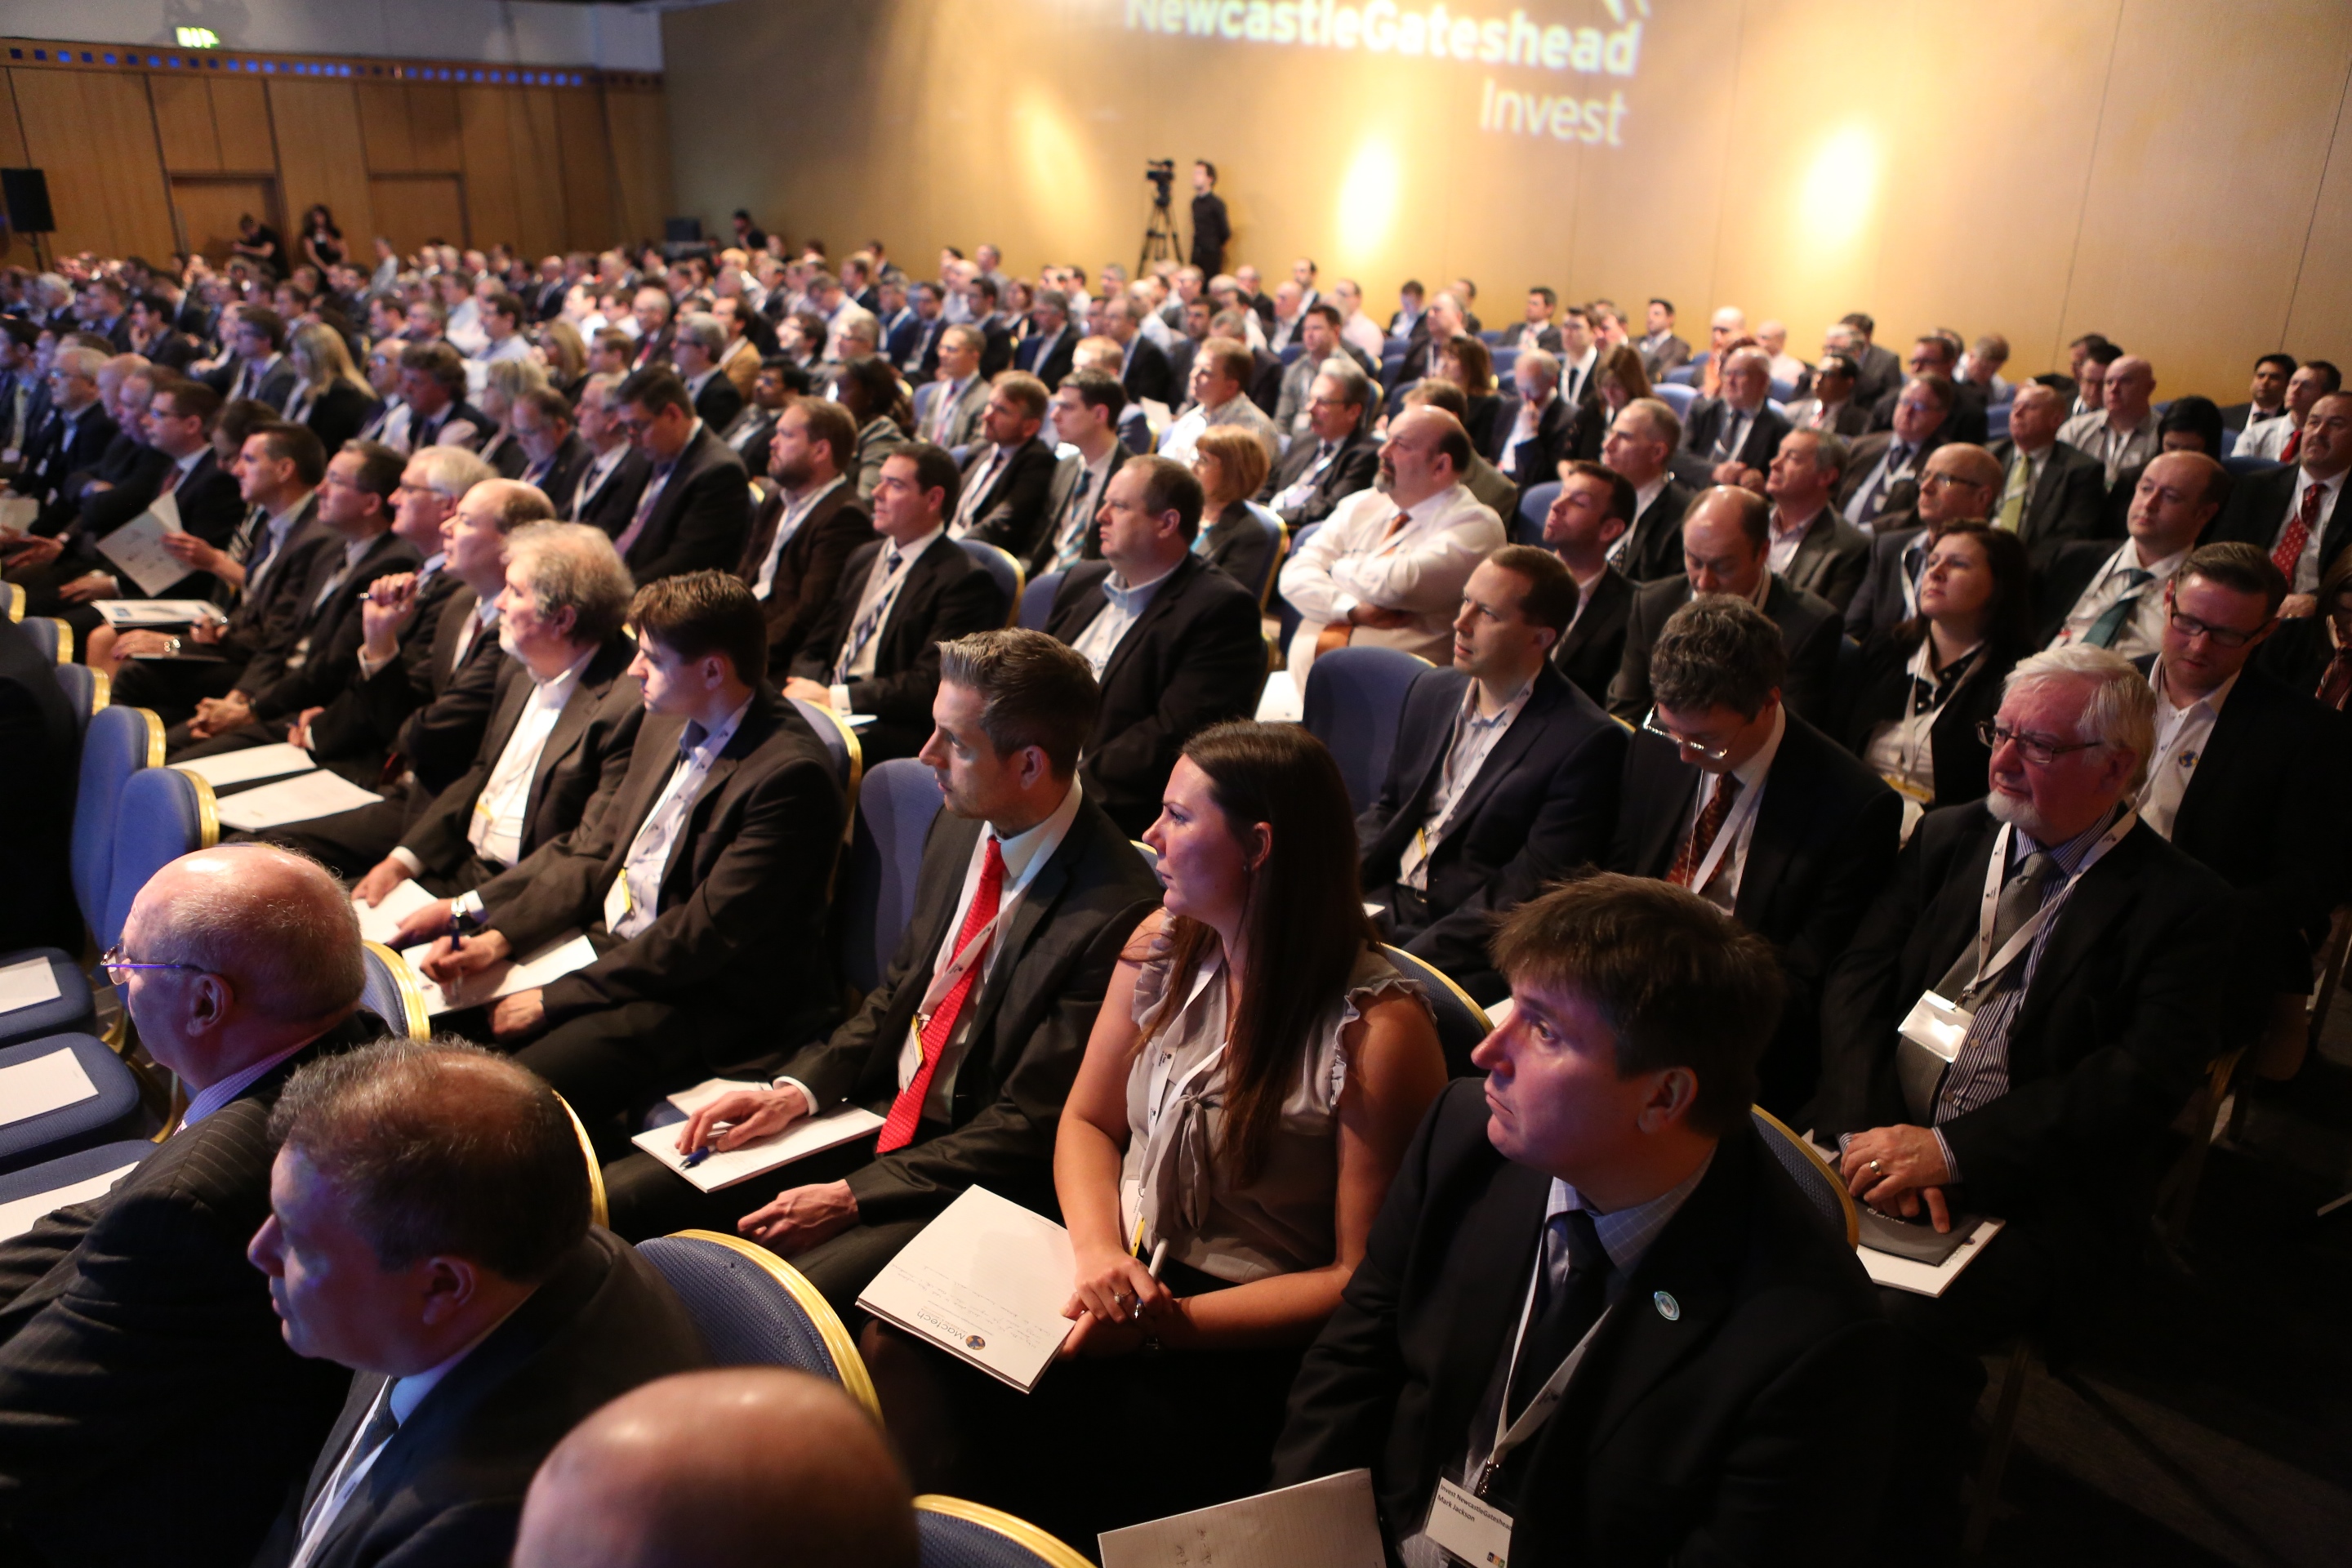 'Energy: A Balanced Future' Conference Attracting Big Industry Players